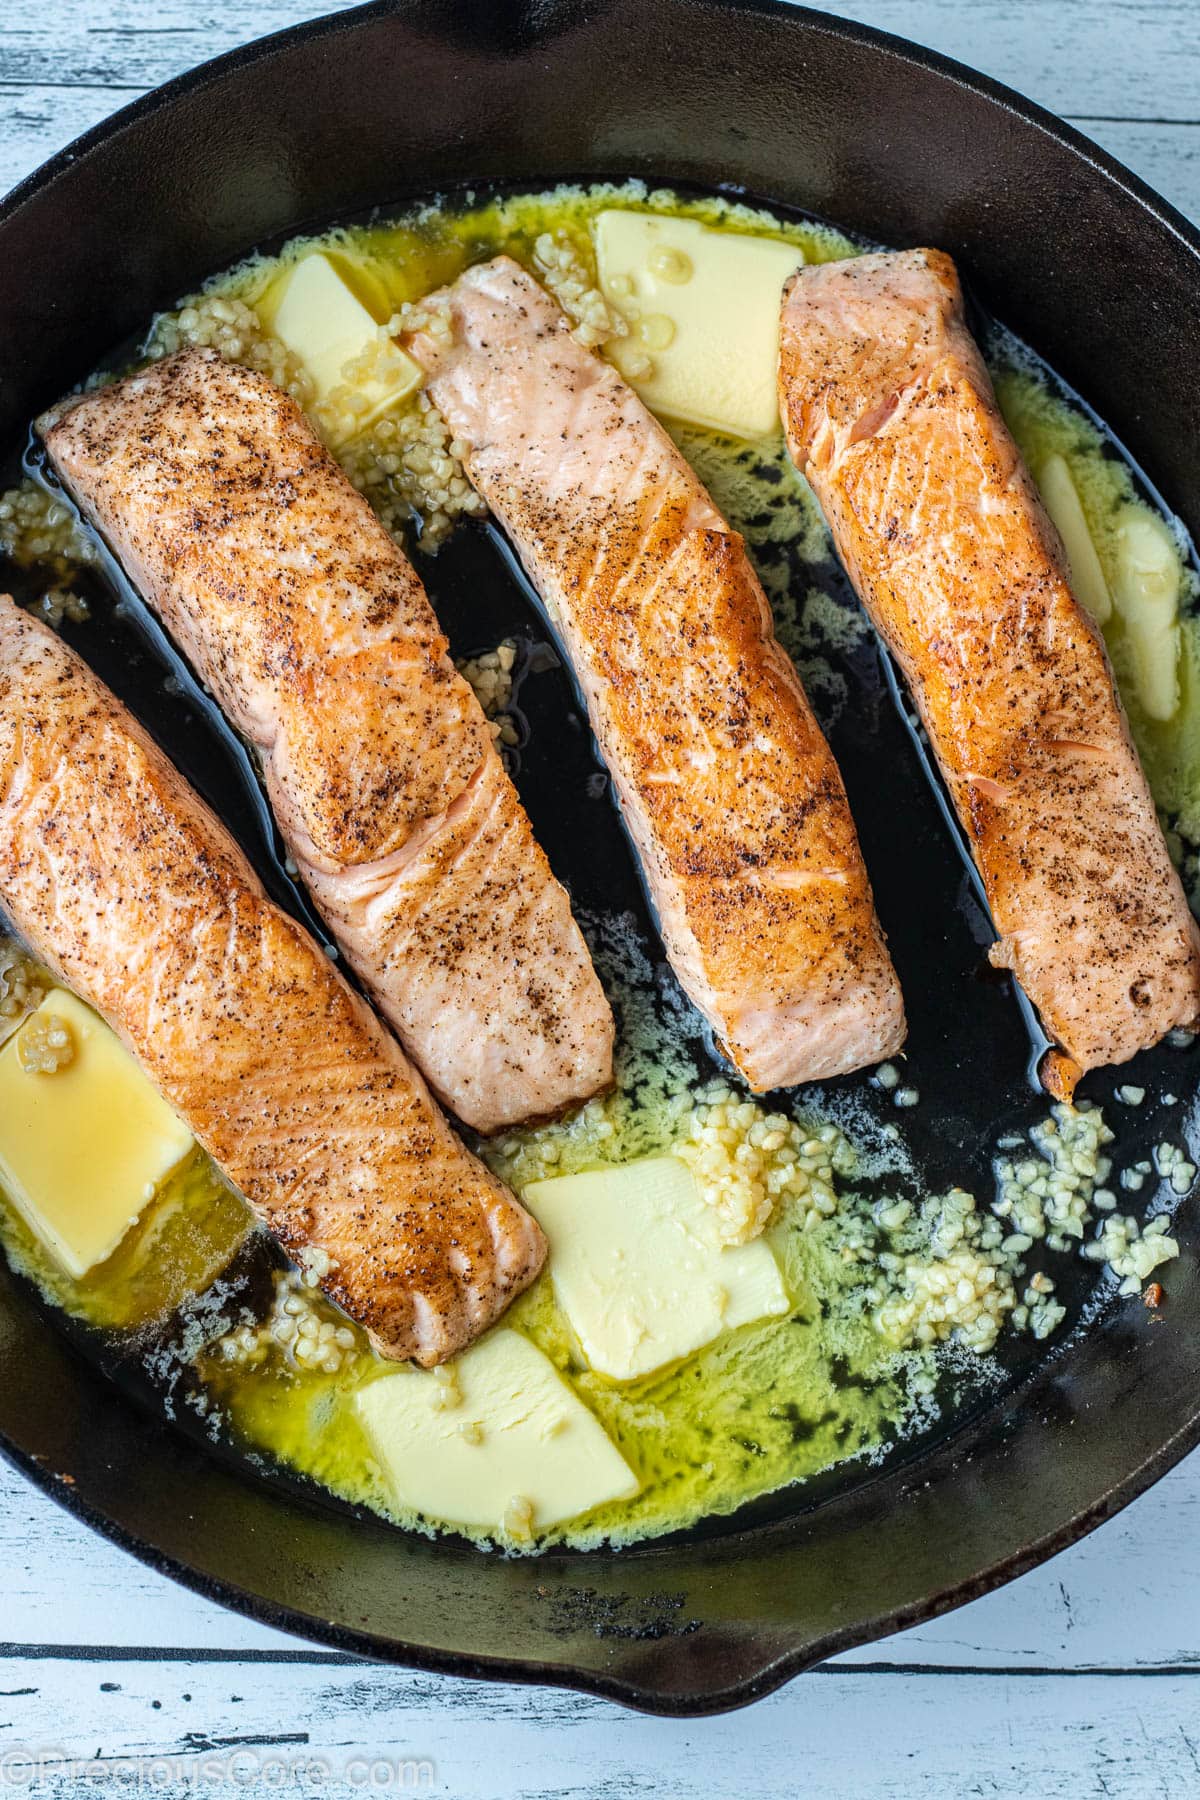 Butter and minced garlic in a cast iron skillet with seared salmon.